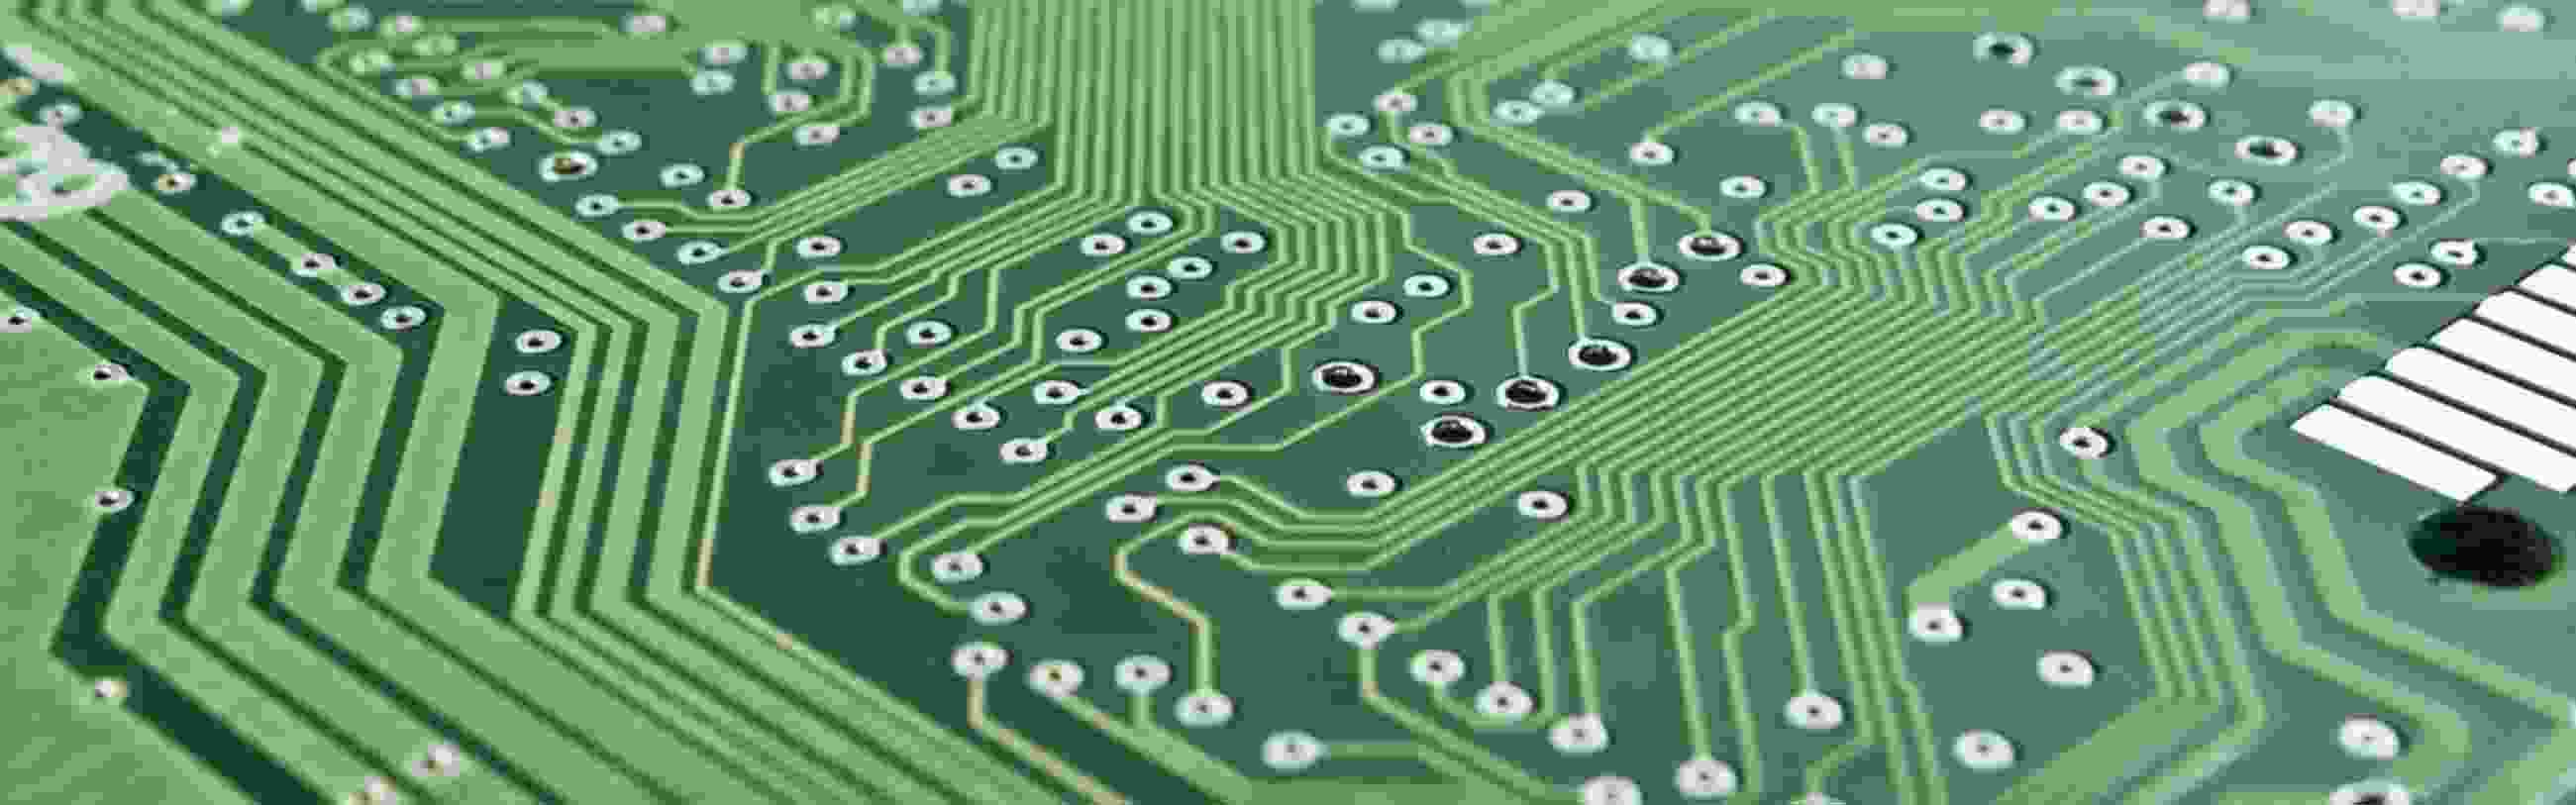 close-up view of a green circuitboard